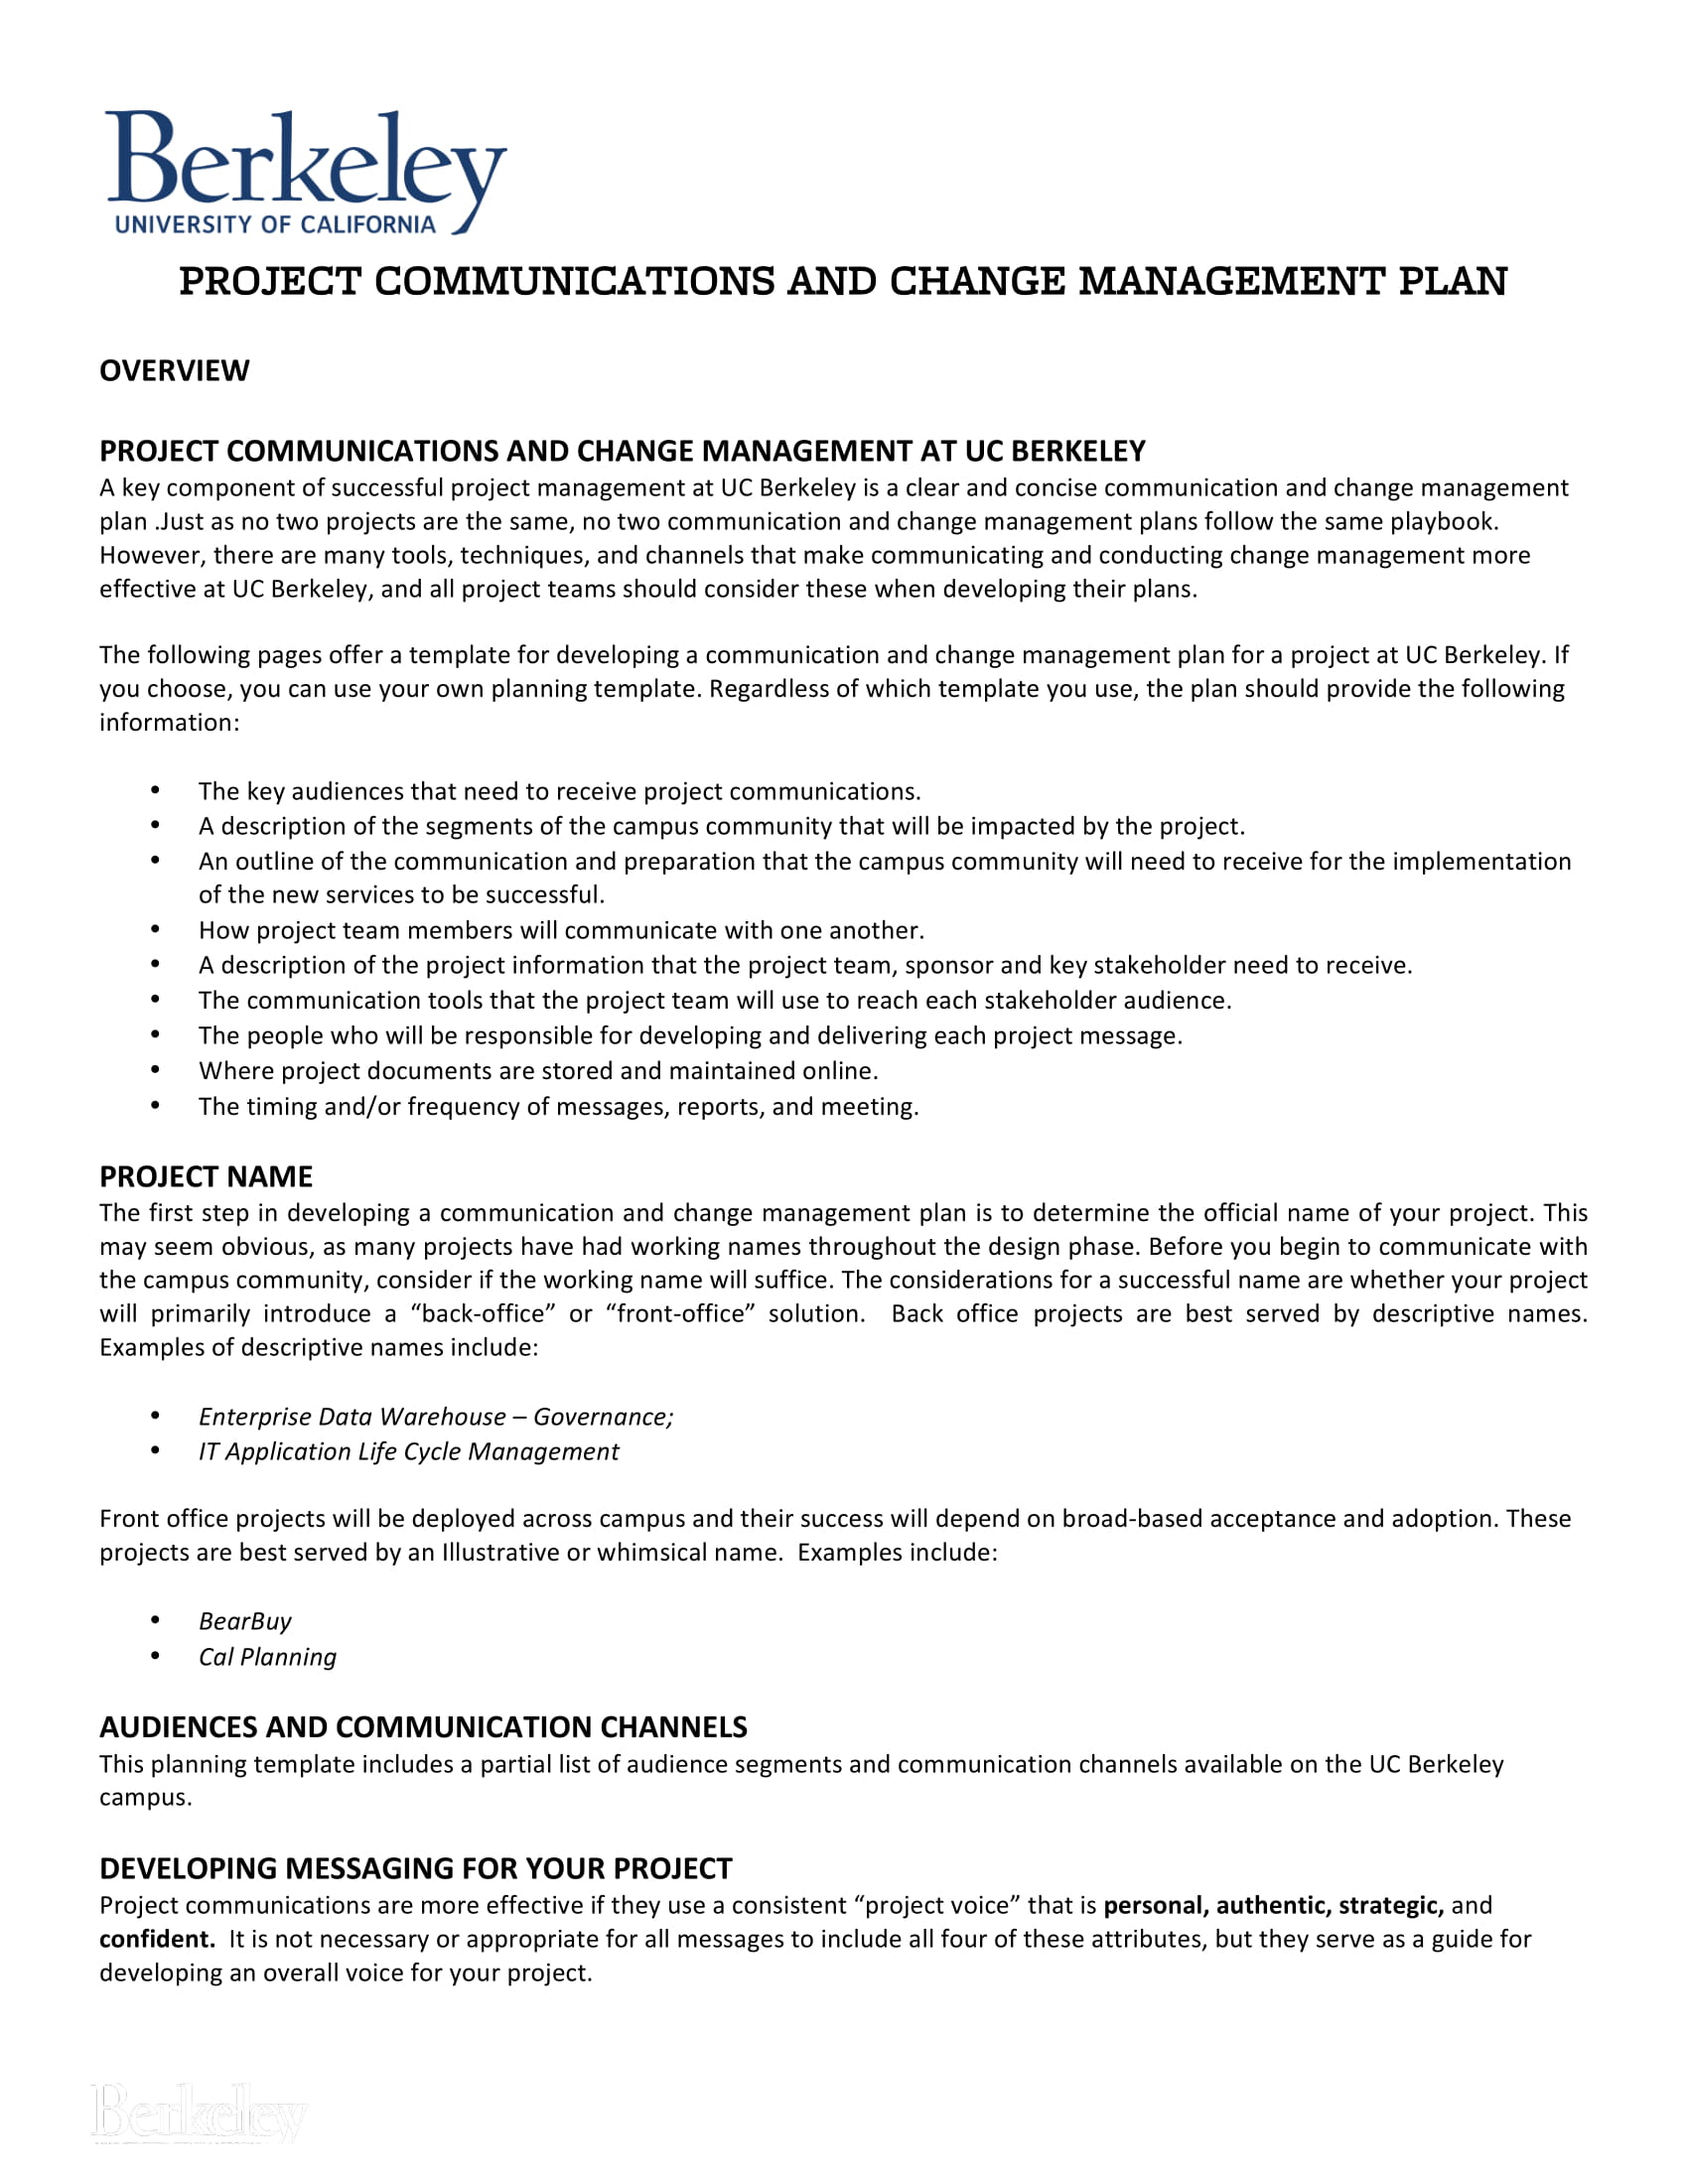 Project Communication and Change Management Plan Example